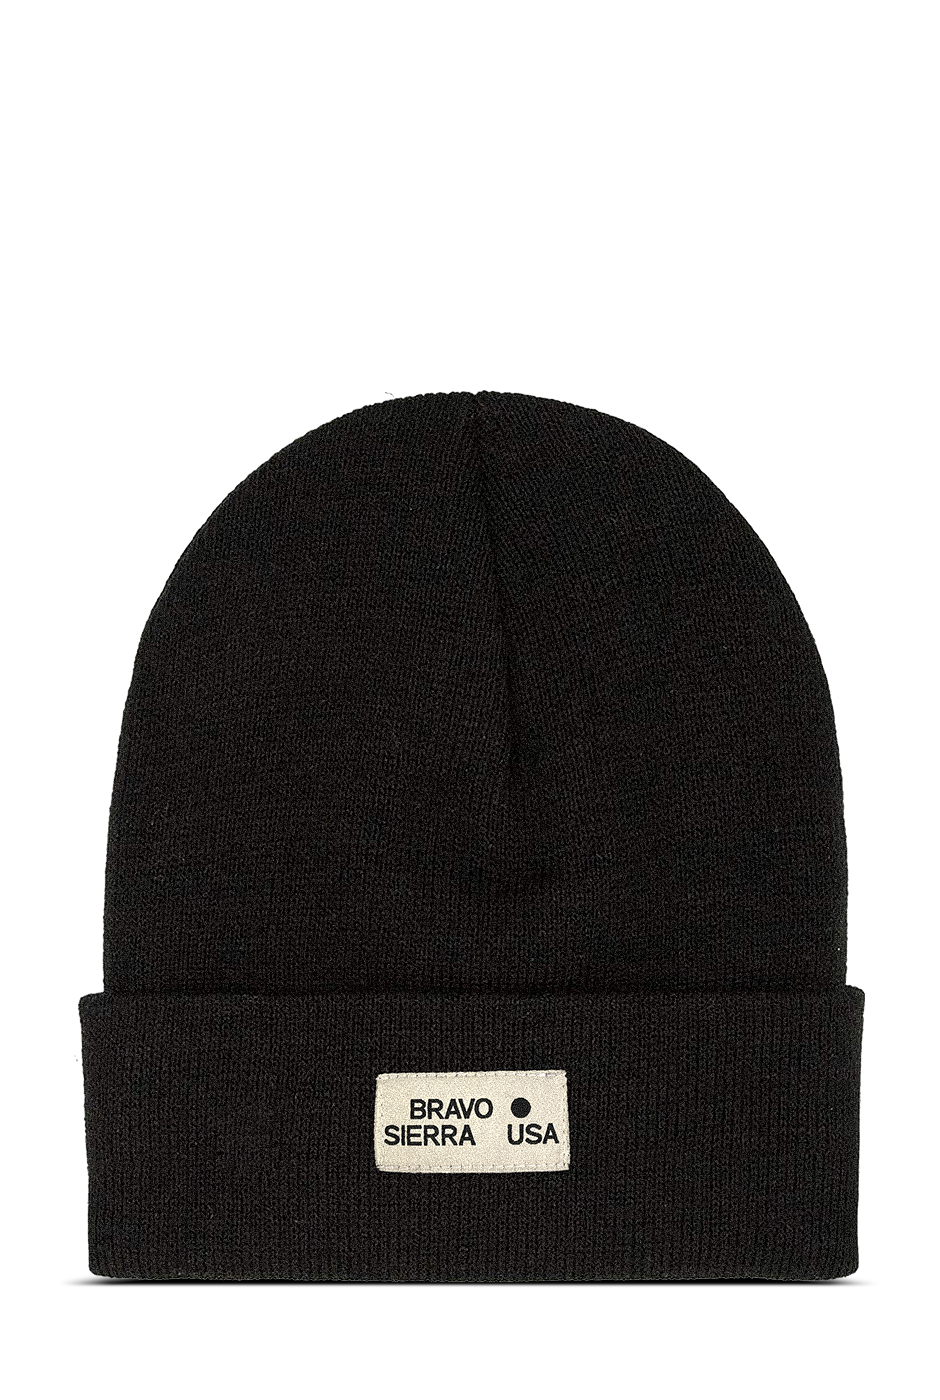 LIMITED-EDITION BEANIE